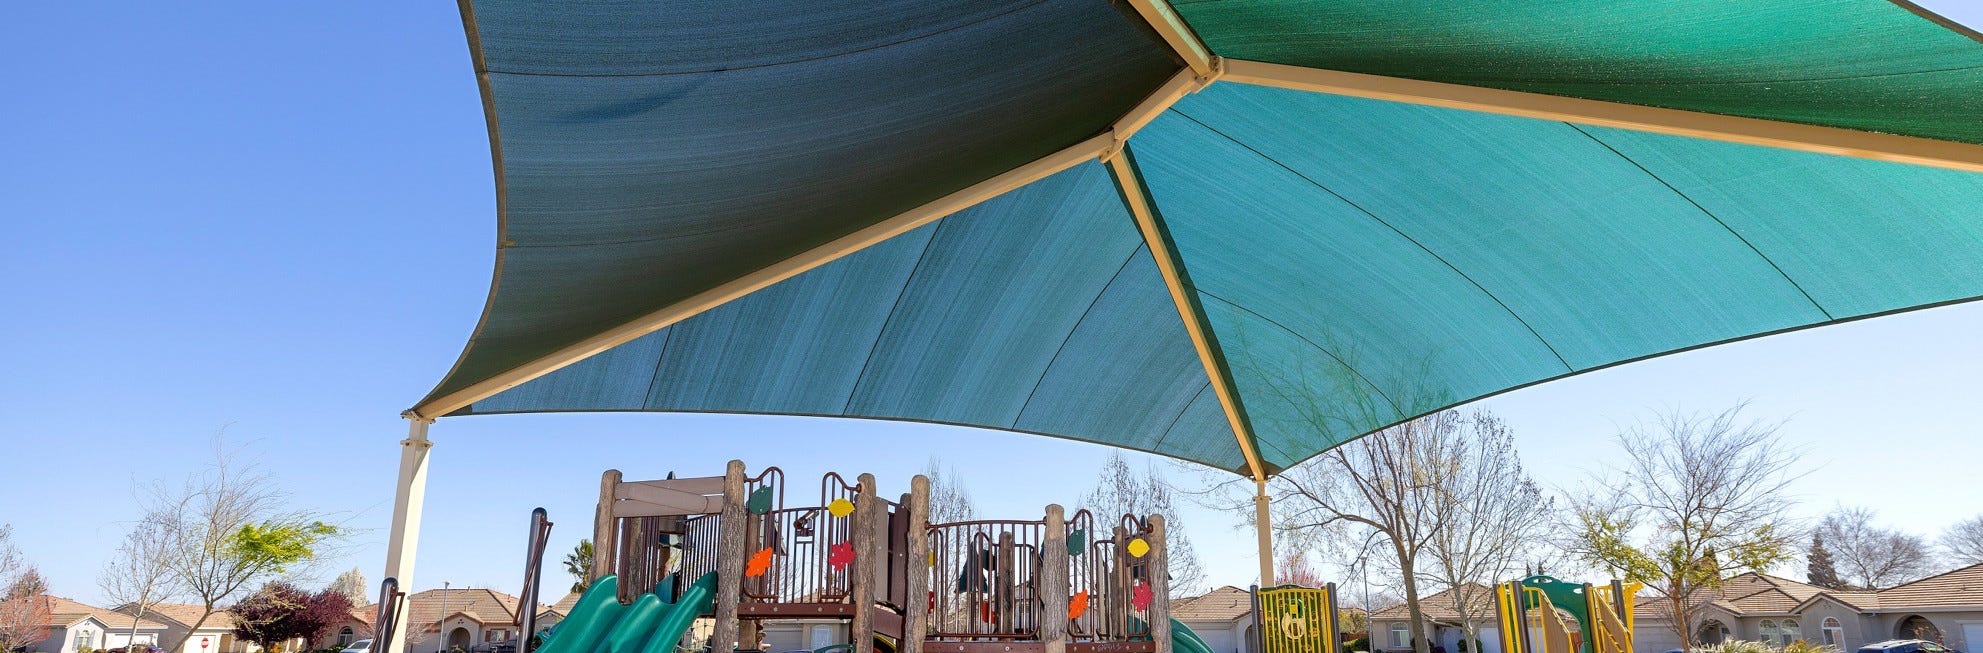 Four Benefits of Playground Shade Structures